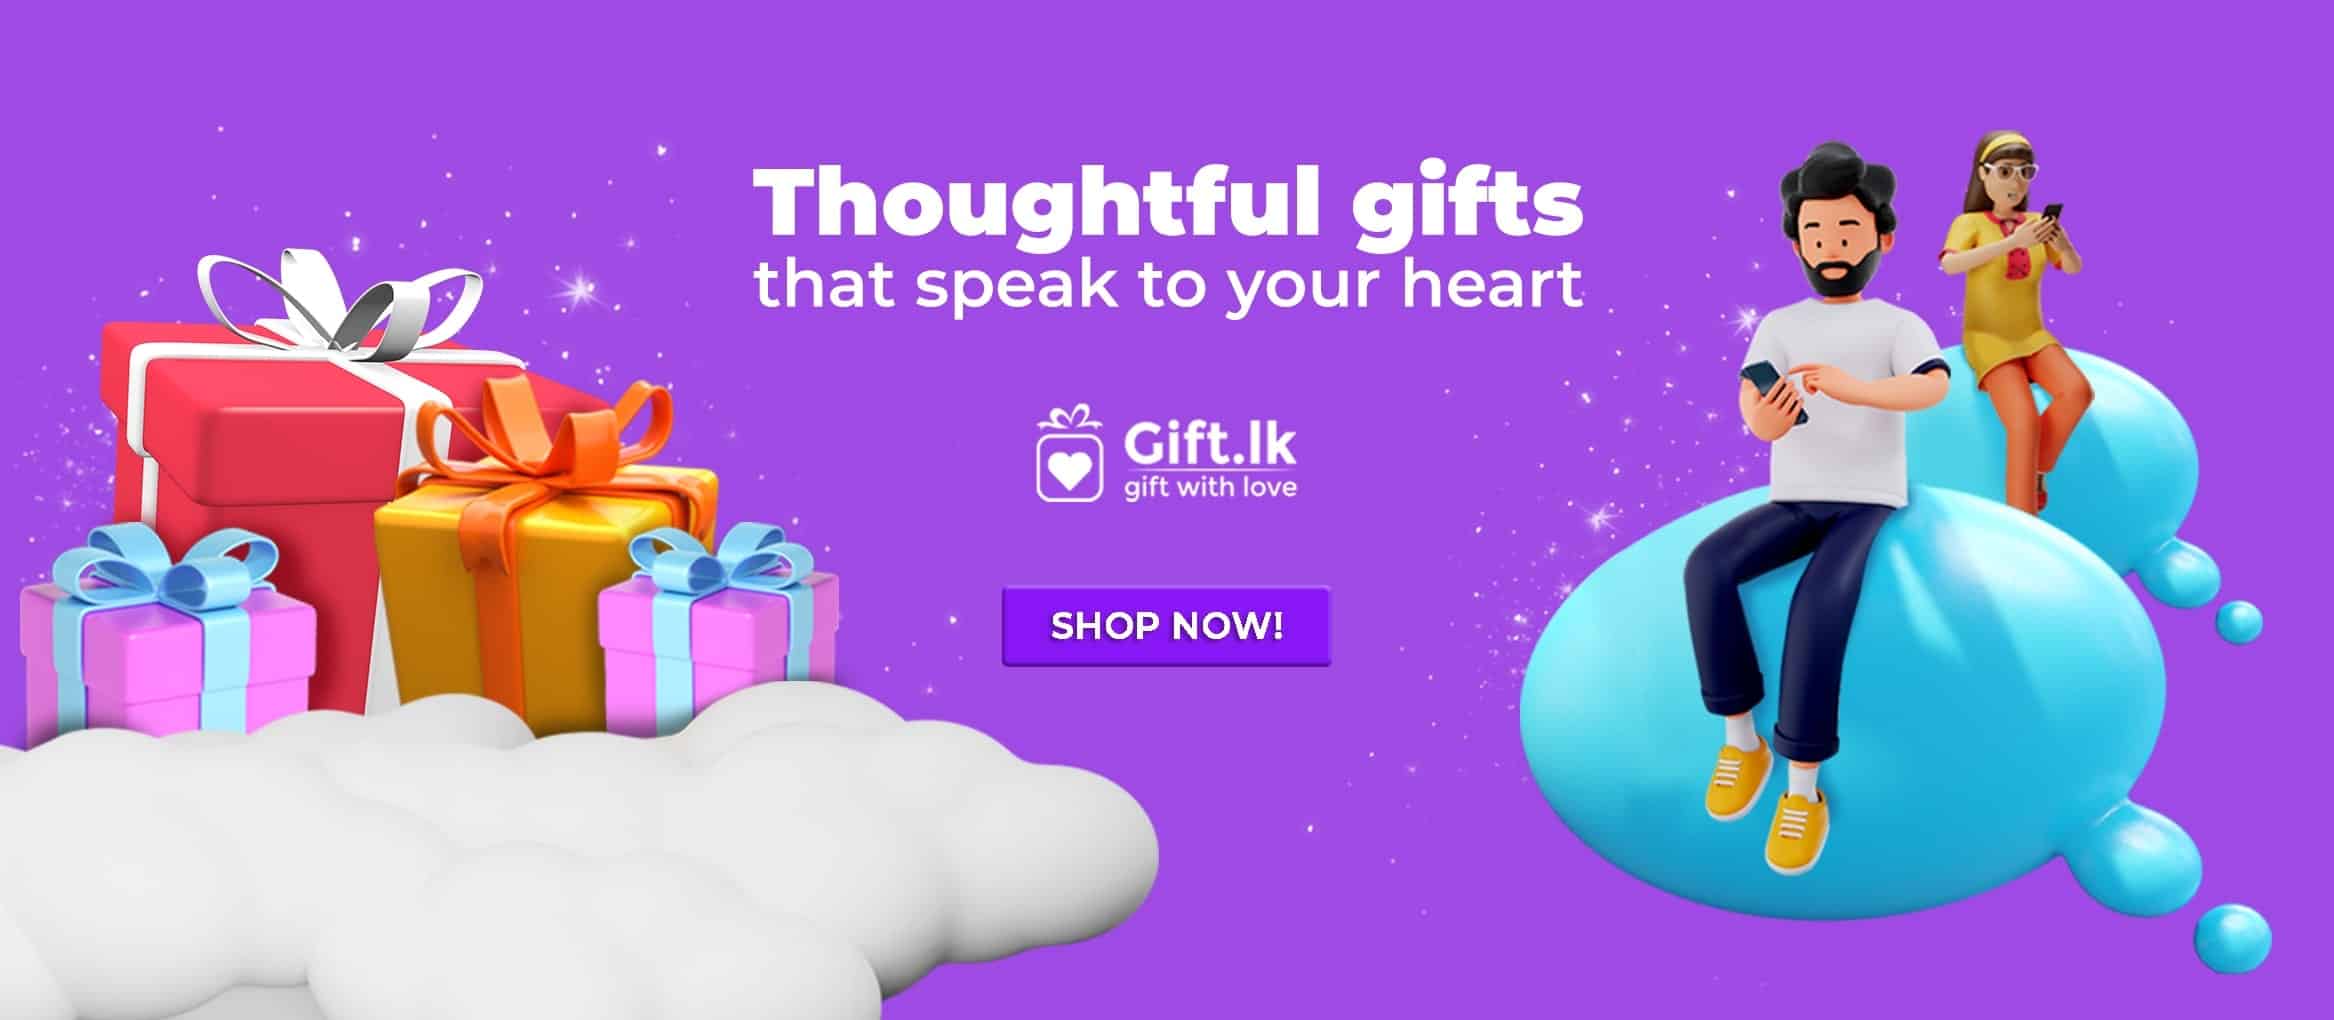 thought-full-gifts